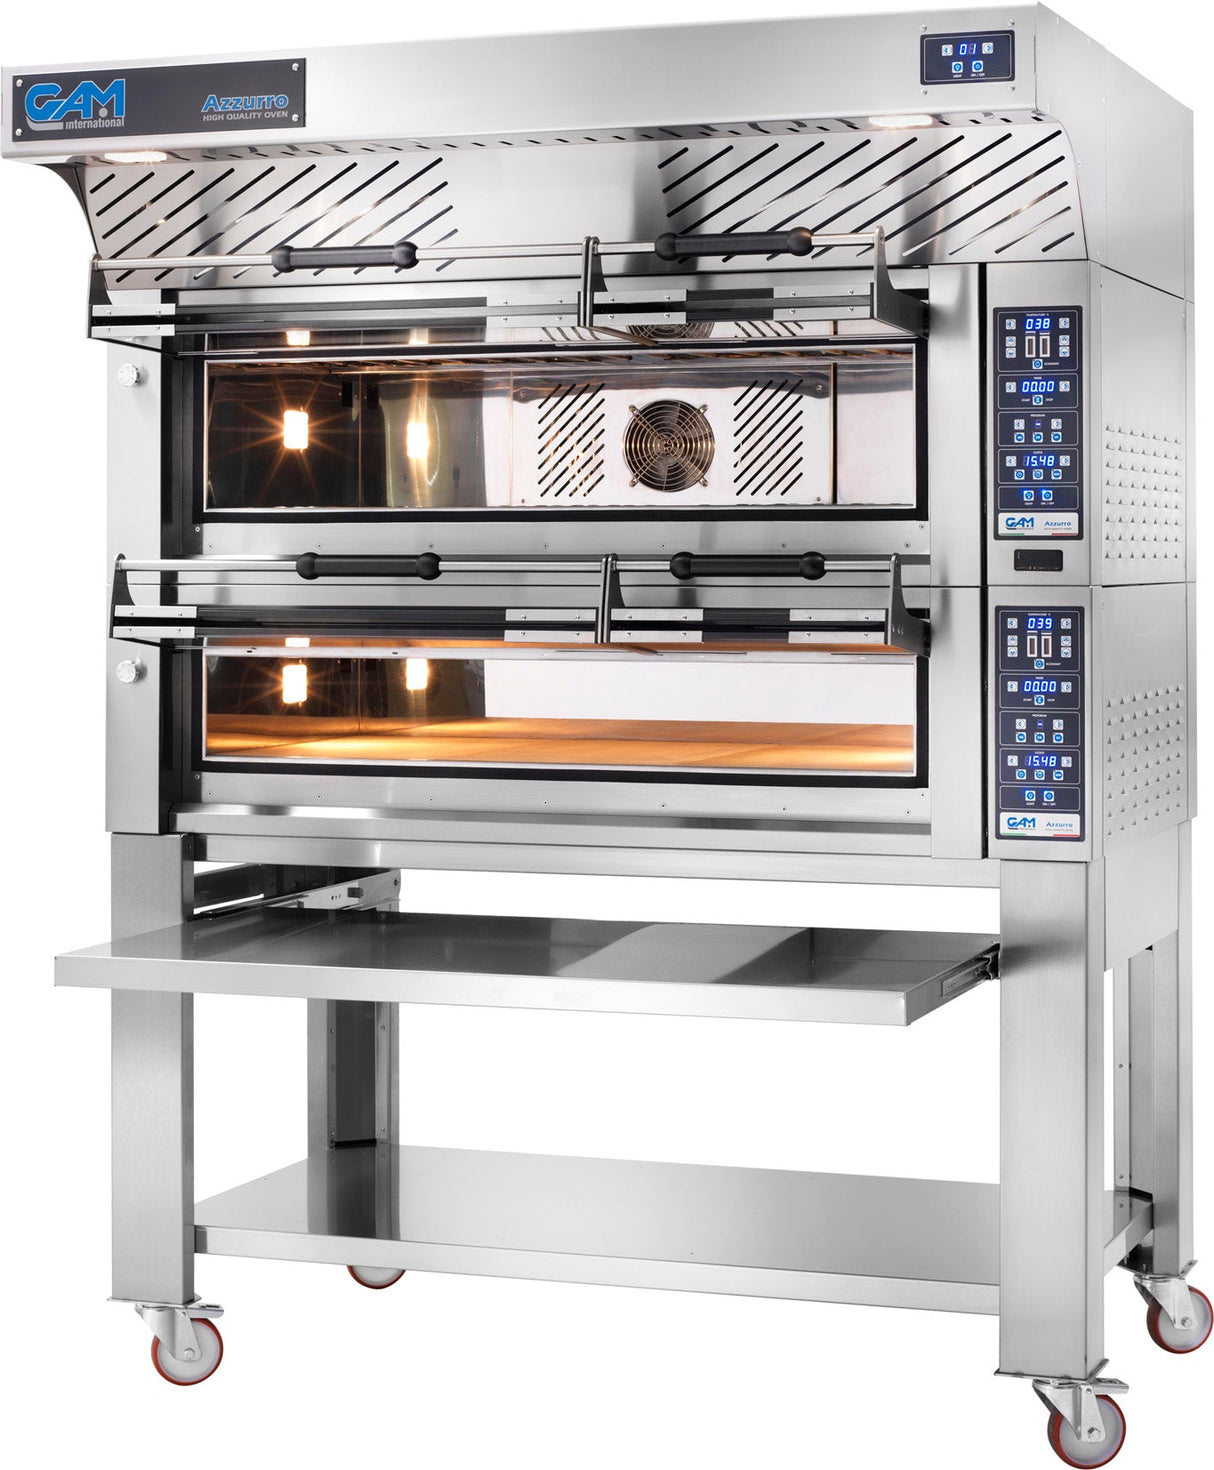 AZZURRO Bakery 3 Stone Deck Oven with Dual Static/Fan Forced Technology